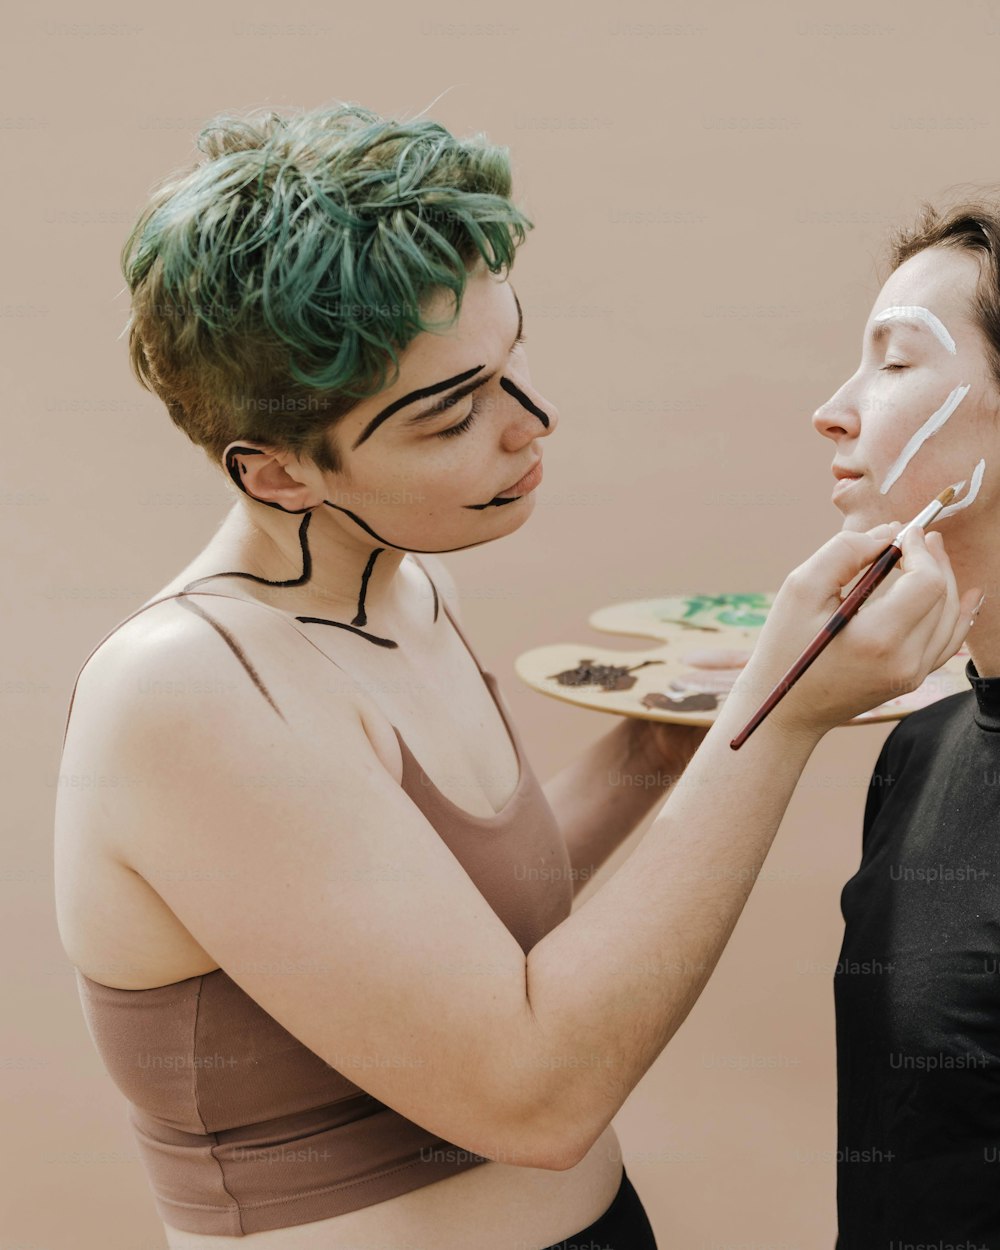 a woman with green hair is painting another woman's face